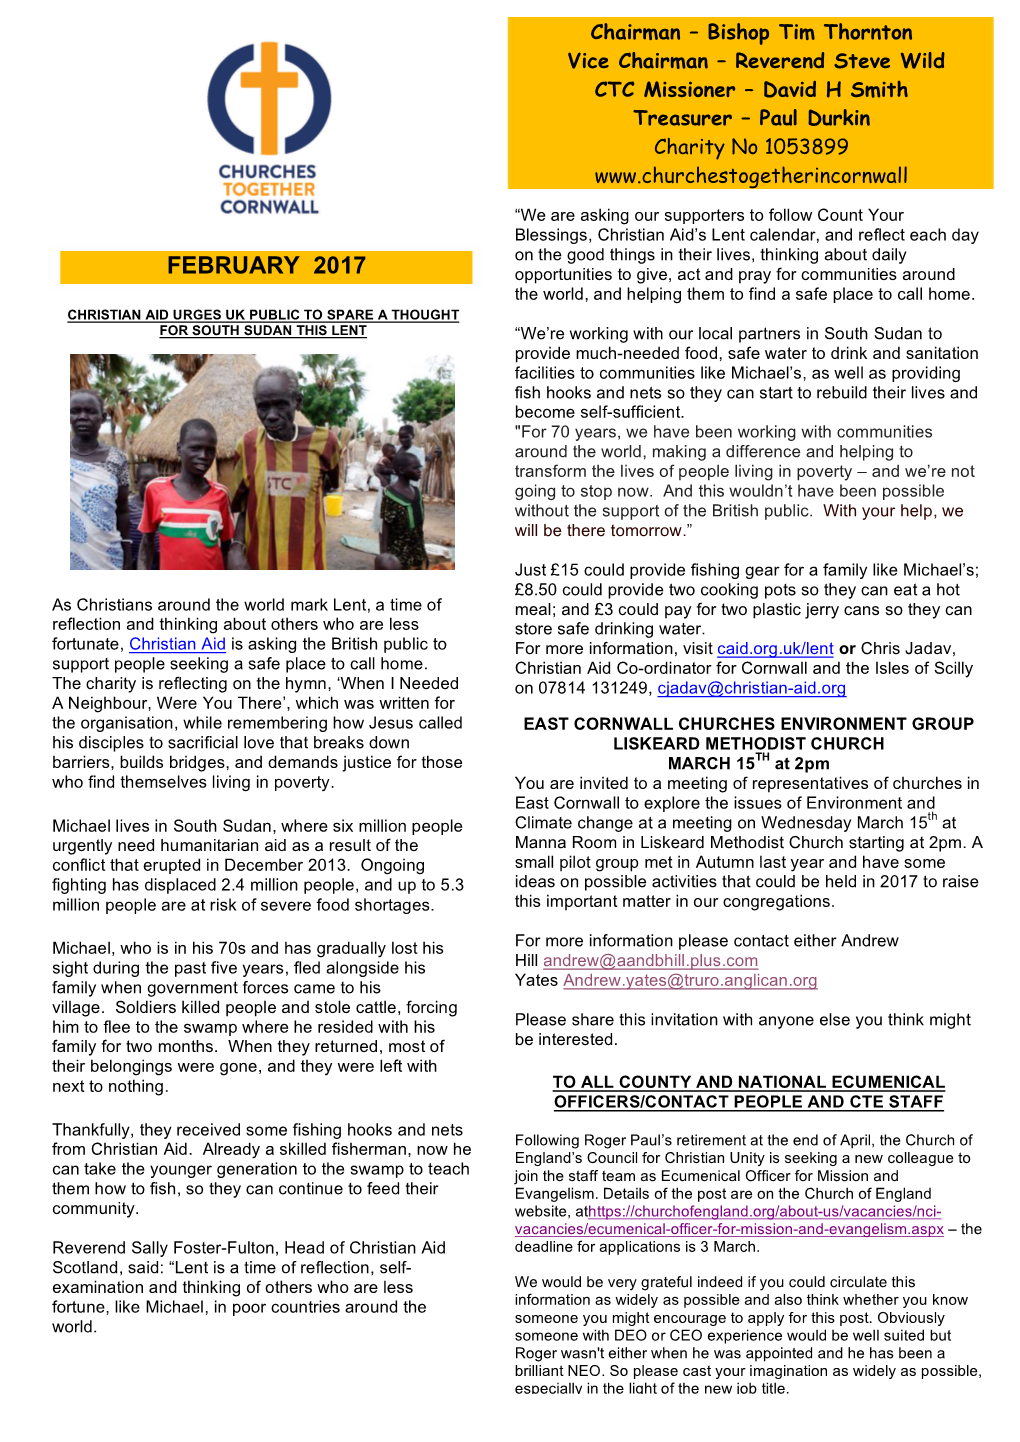 Read Newsletter and Diary of Events